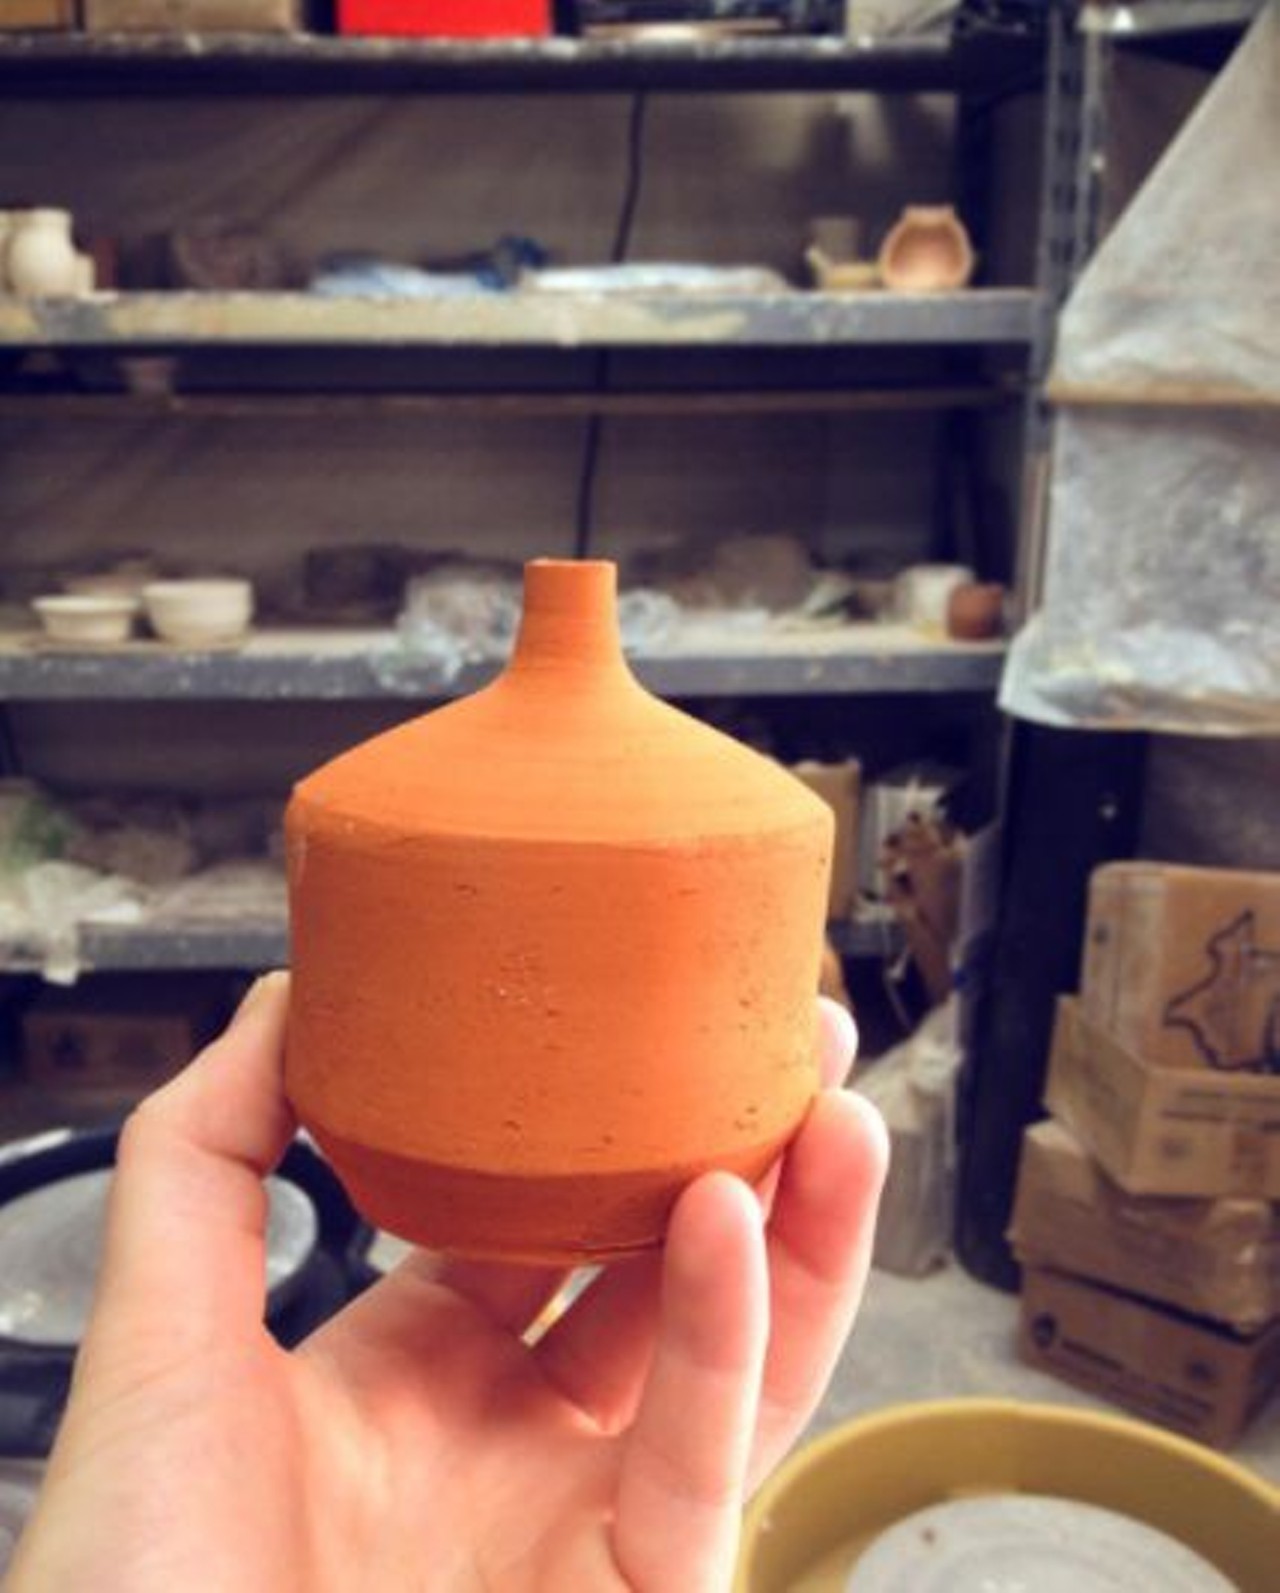 Get crafty with DIY projects
Have your friends over and work on fun DIY projects. Once you guys feel comfortable in your artistic skills, try shaking things up by joining an art class like Sunin Clay Studio or visiting a sit-in painting store like Clay Casa. 
Photo via Instagram, flyntclay